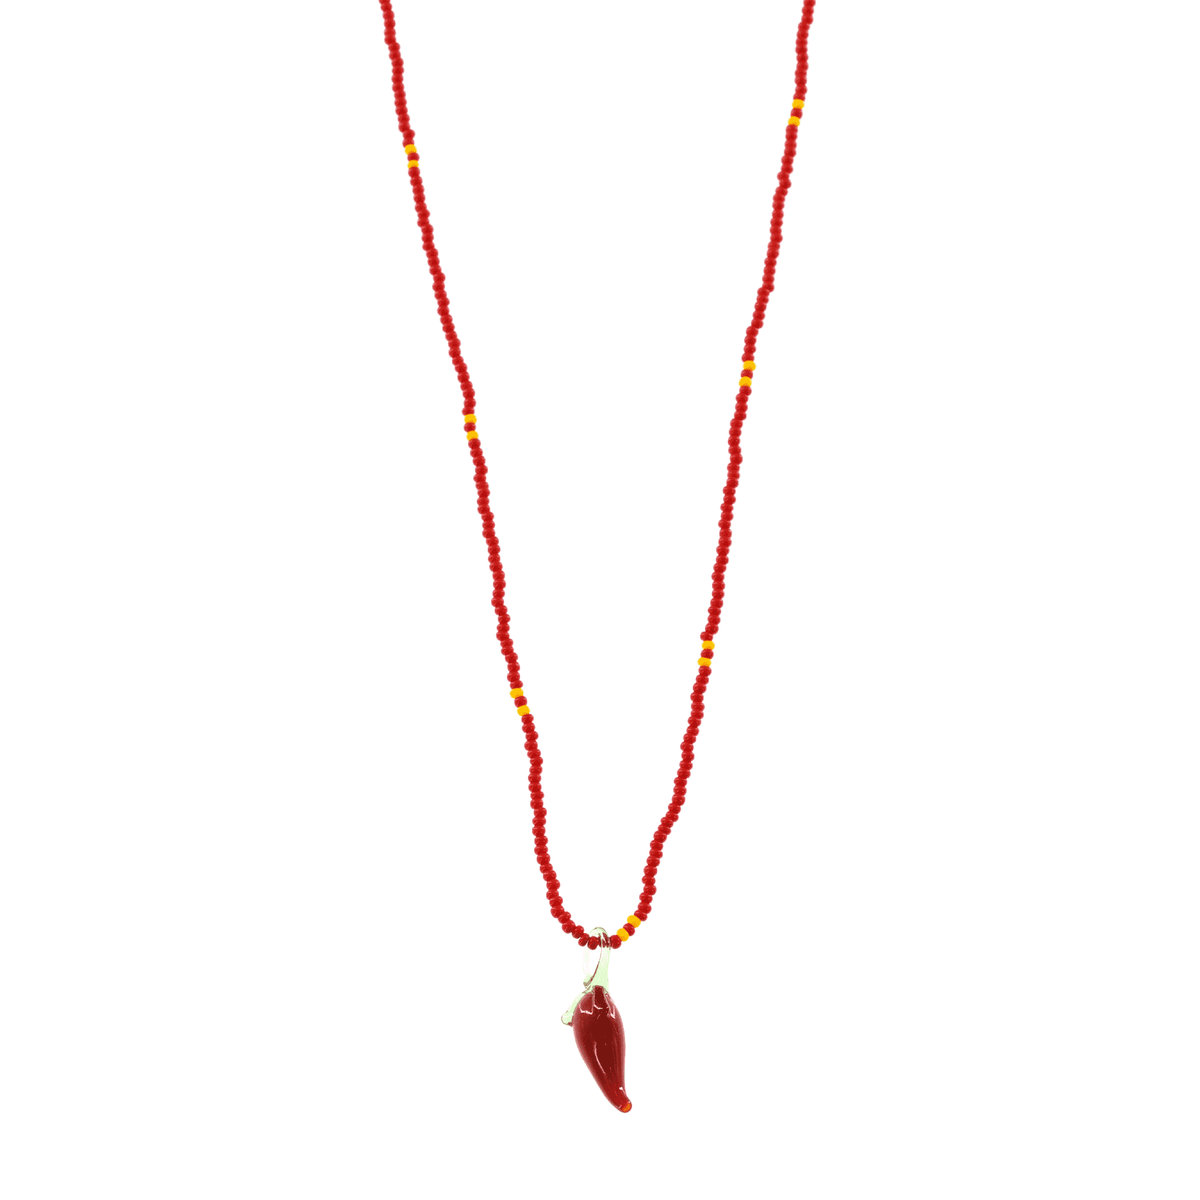 Glass Charm Chili Pepper Necklace - Josephine Alexander Collective